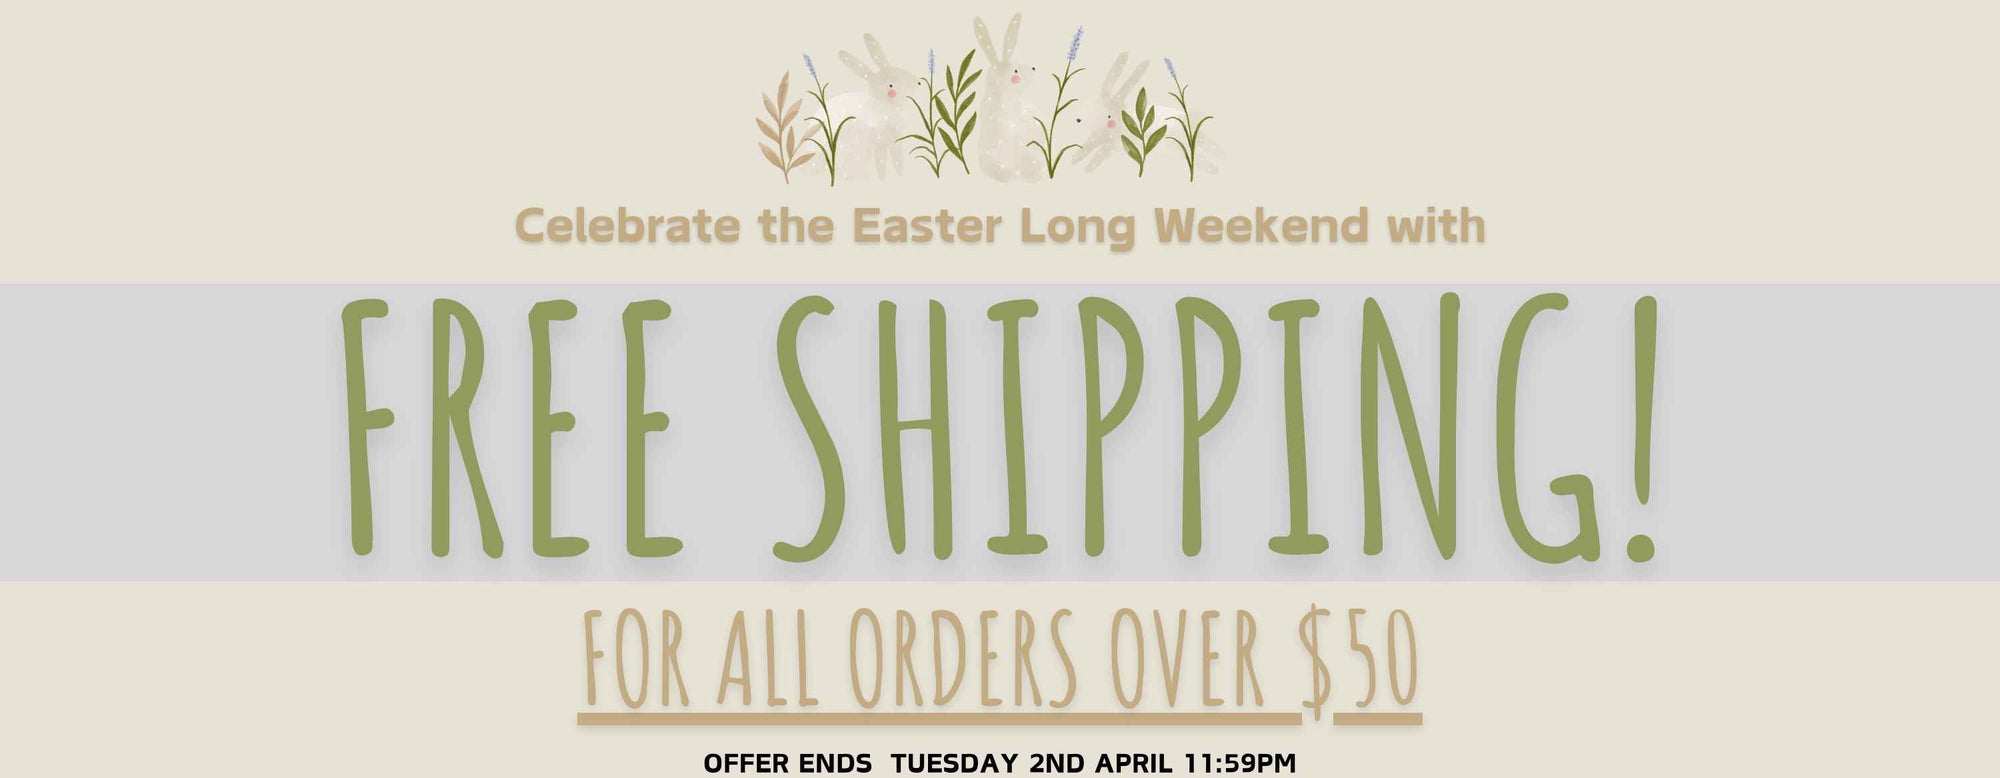 Free shipping for all orders over $50! Offer ends Tuesday 2nd April 11:59pm